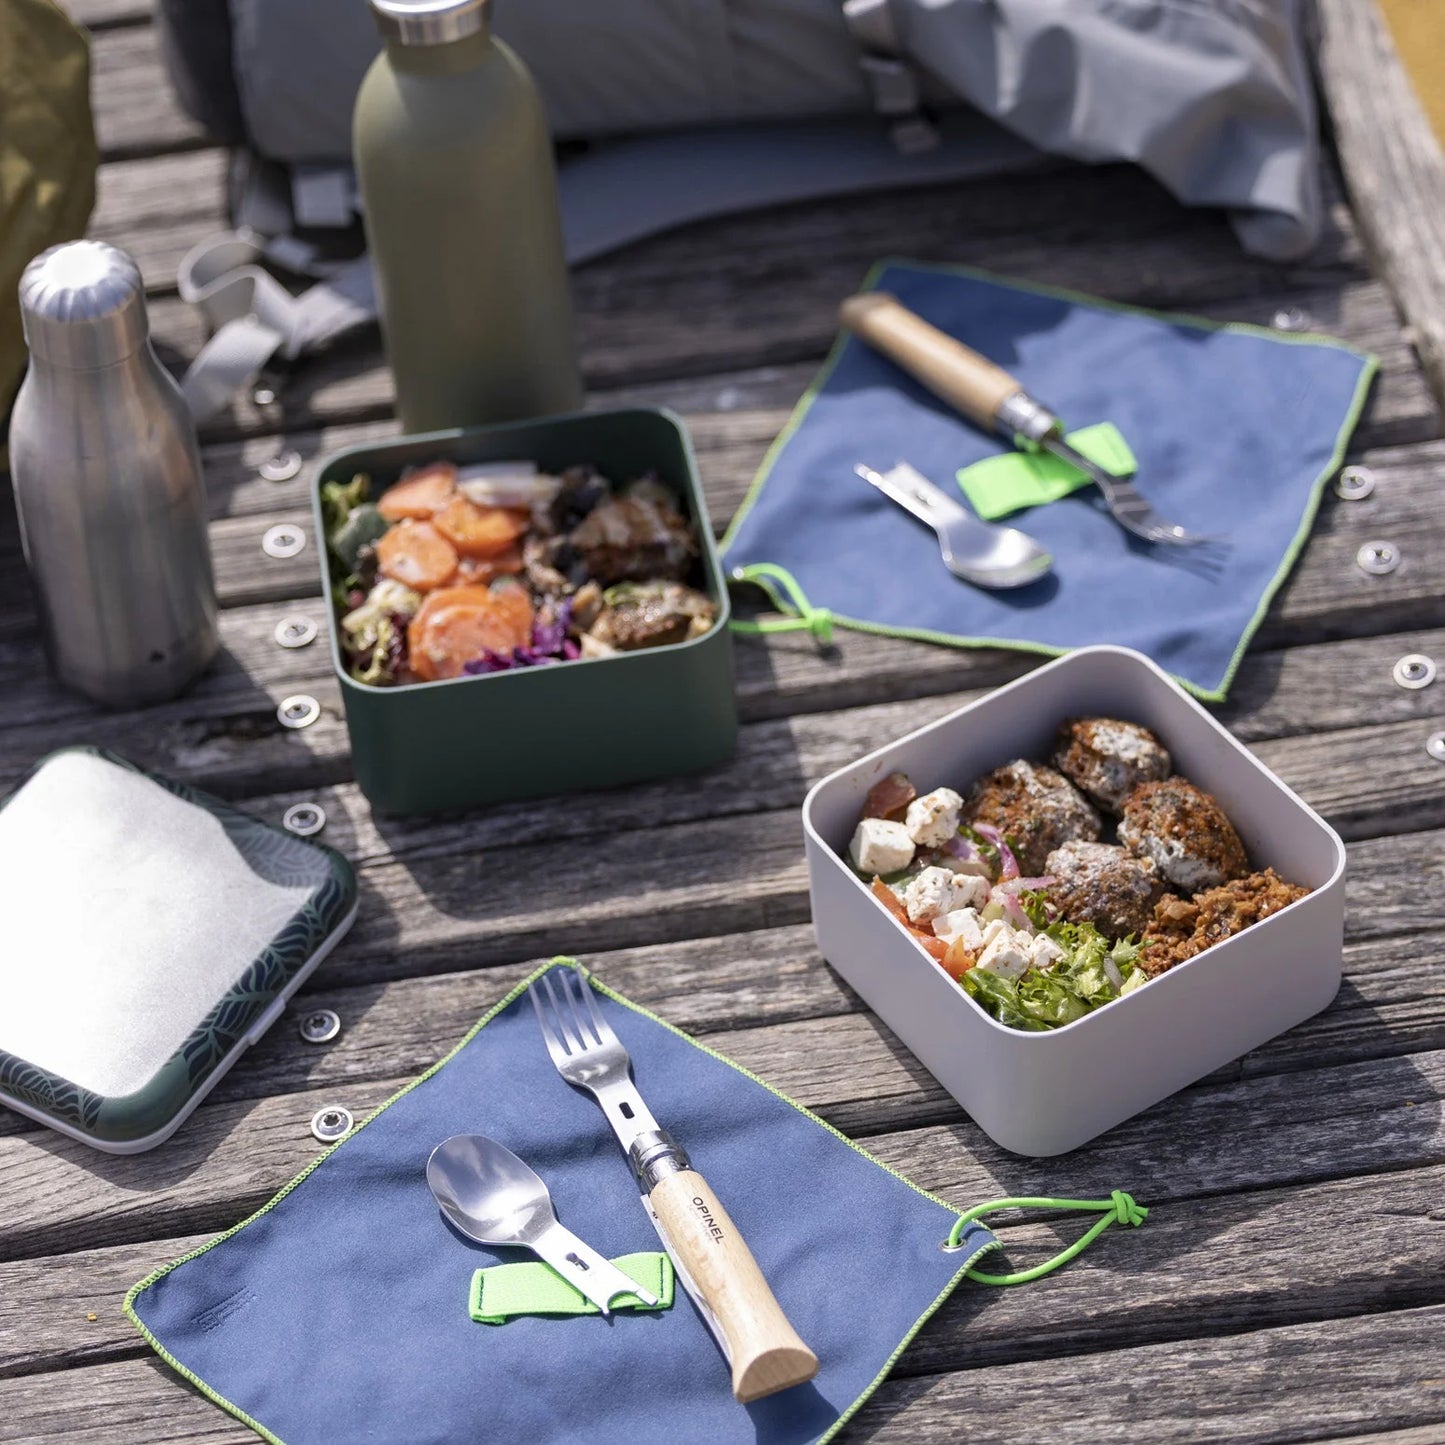 Opinel Picnic + Cutlery Set with No. 8 Folding Knife